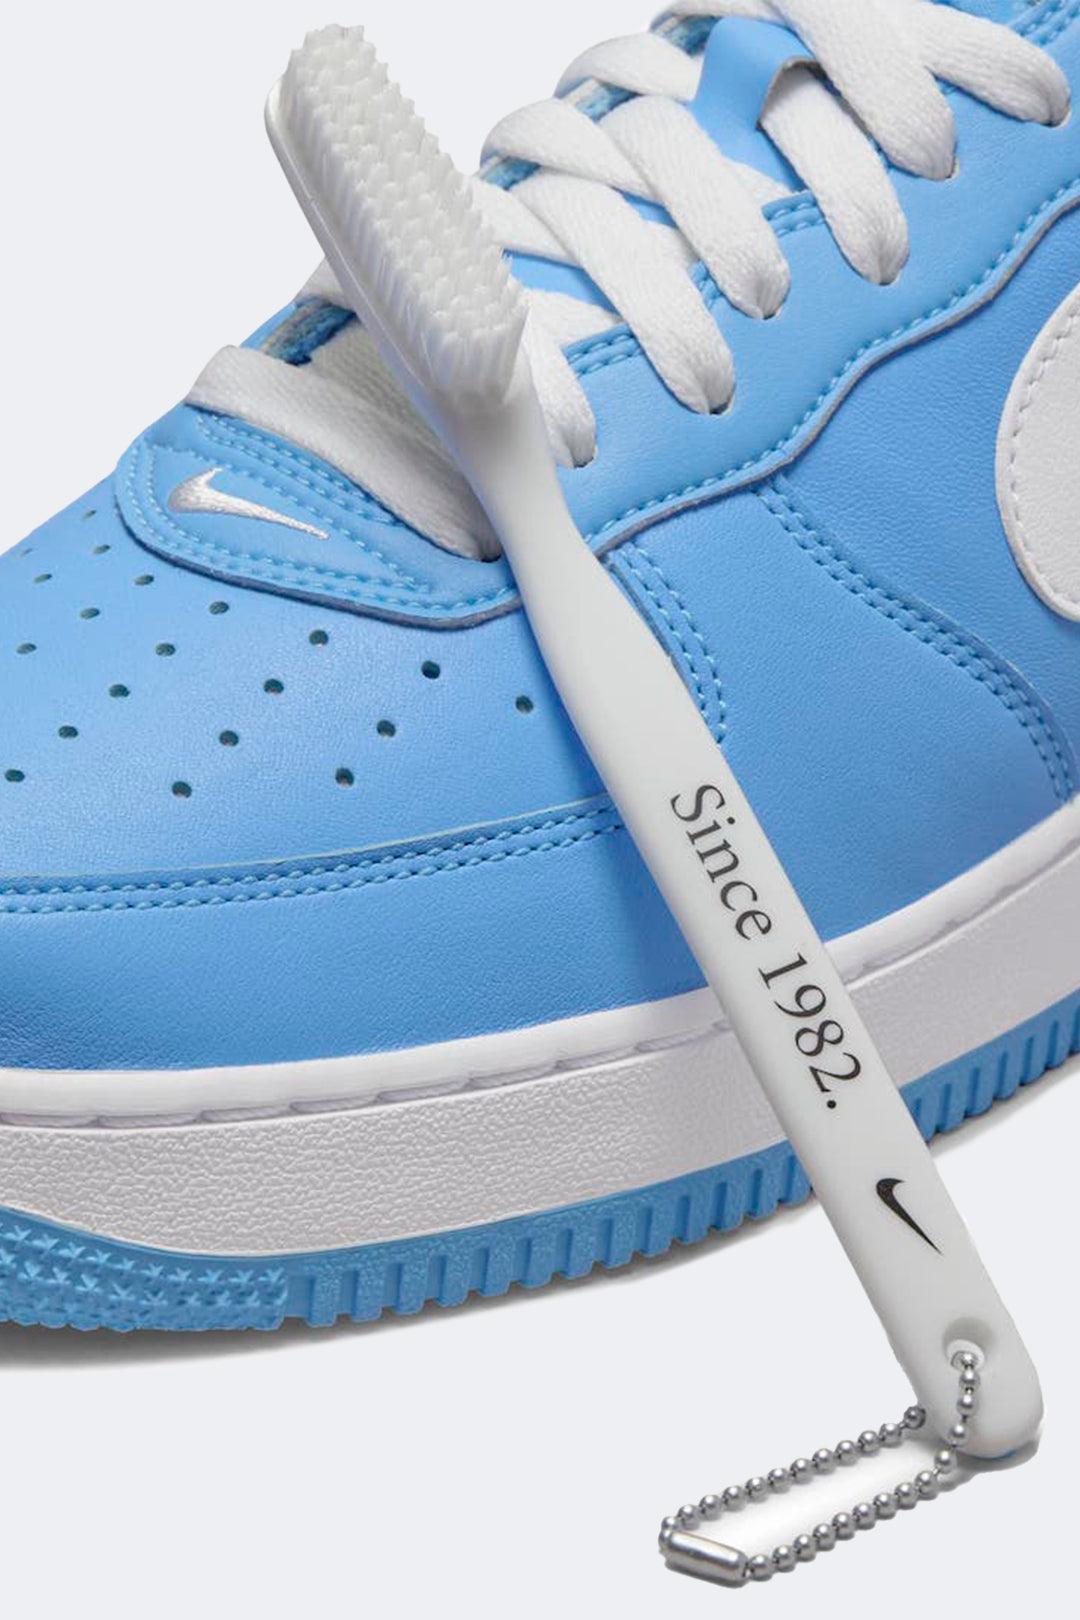 NIKE AIR FORCE 1 LOW SINCE 82 UNC - HYPE